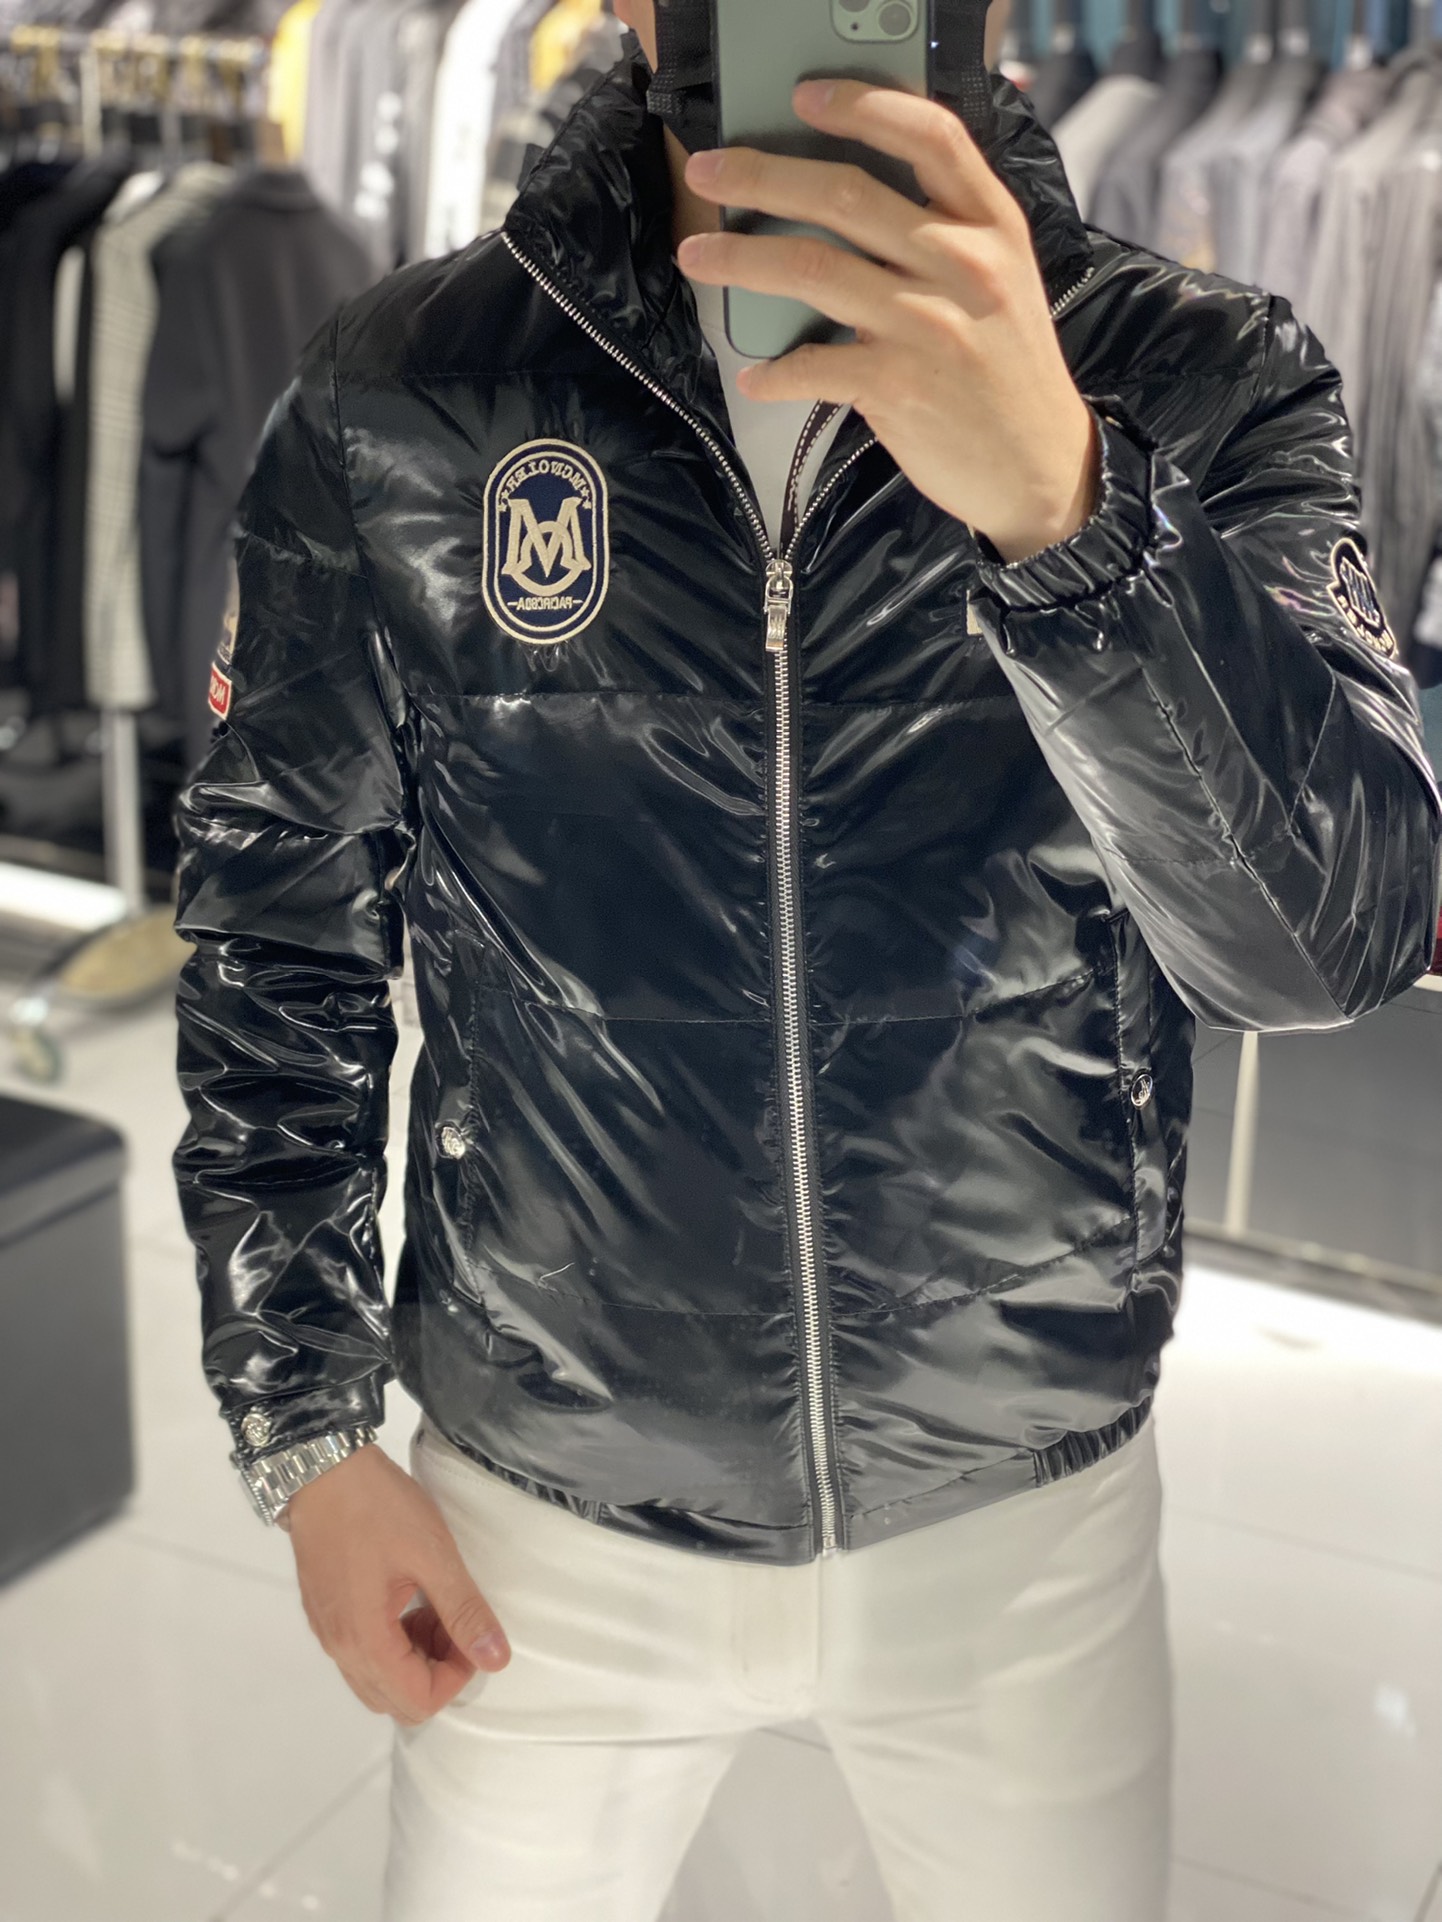 Moncler Clothing Coats & Jackets White Duck Down Winter Collection